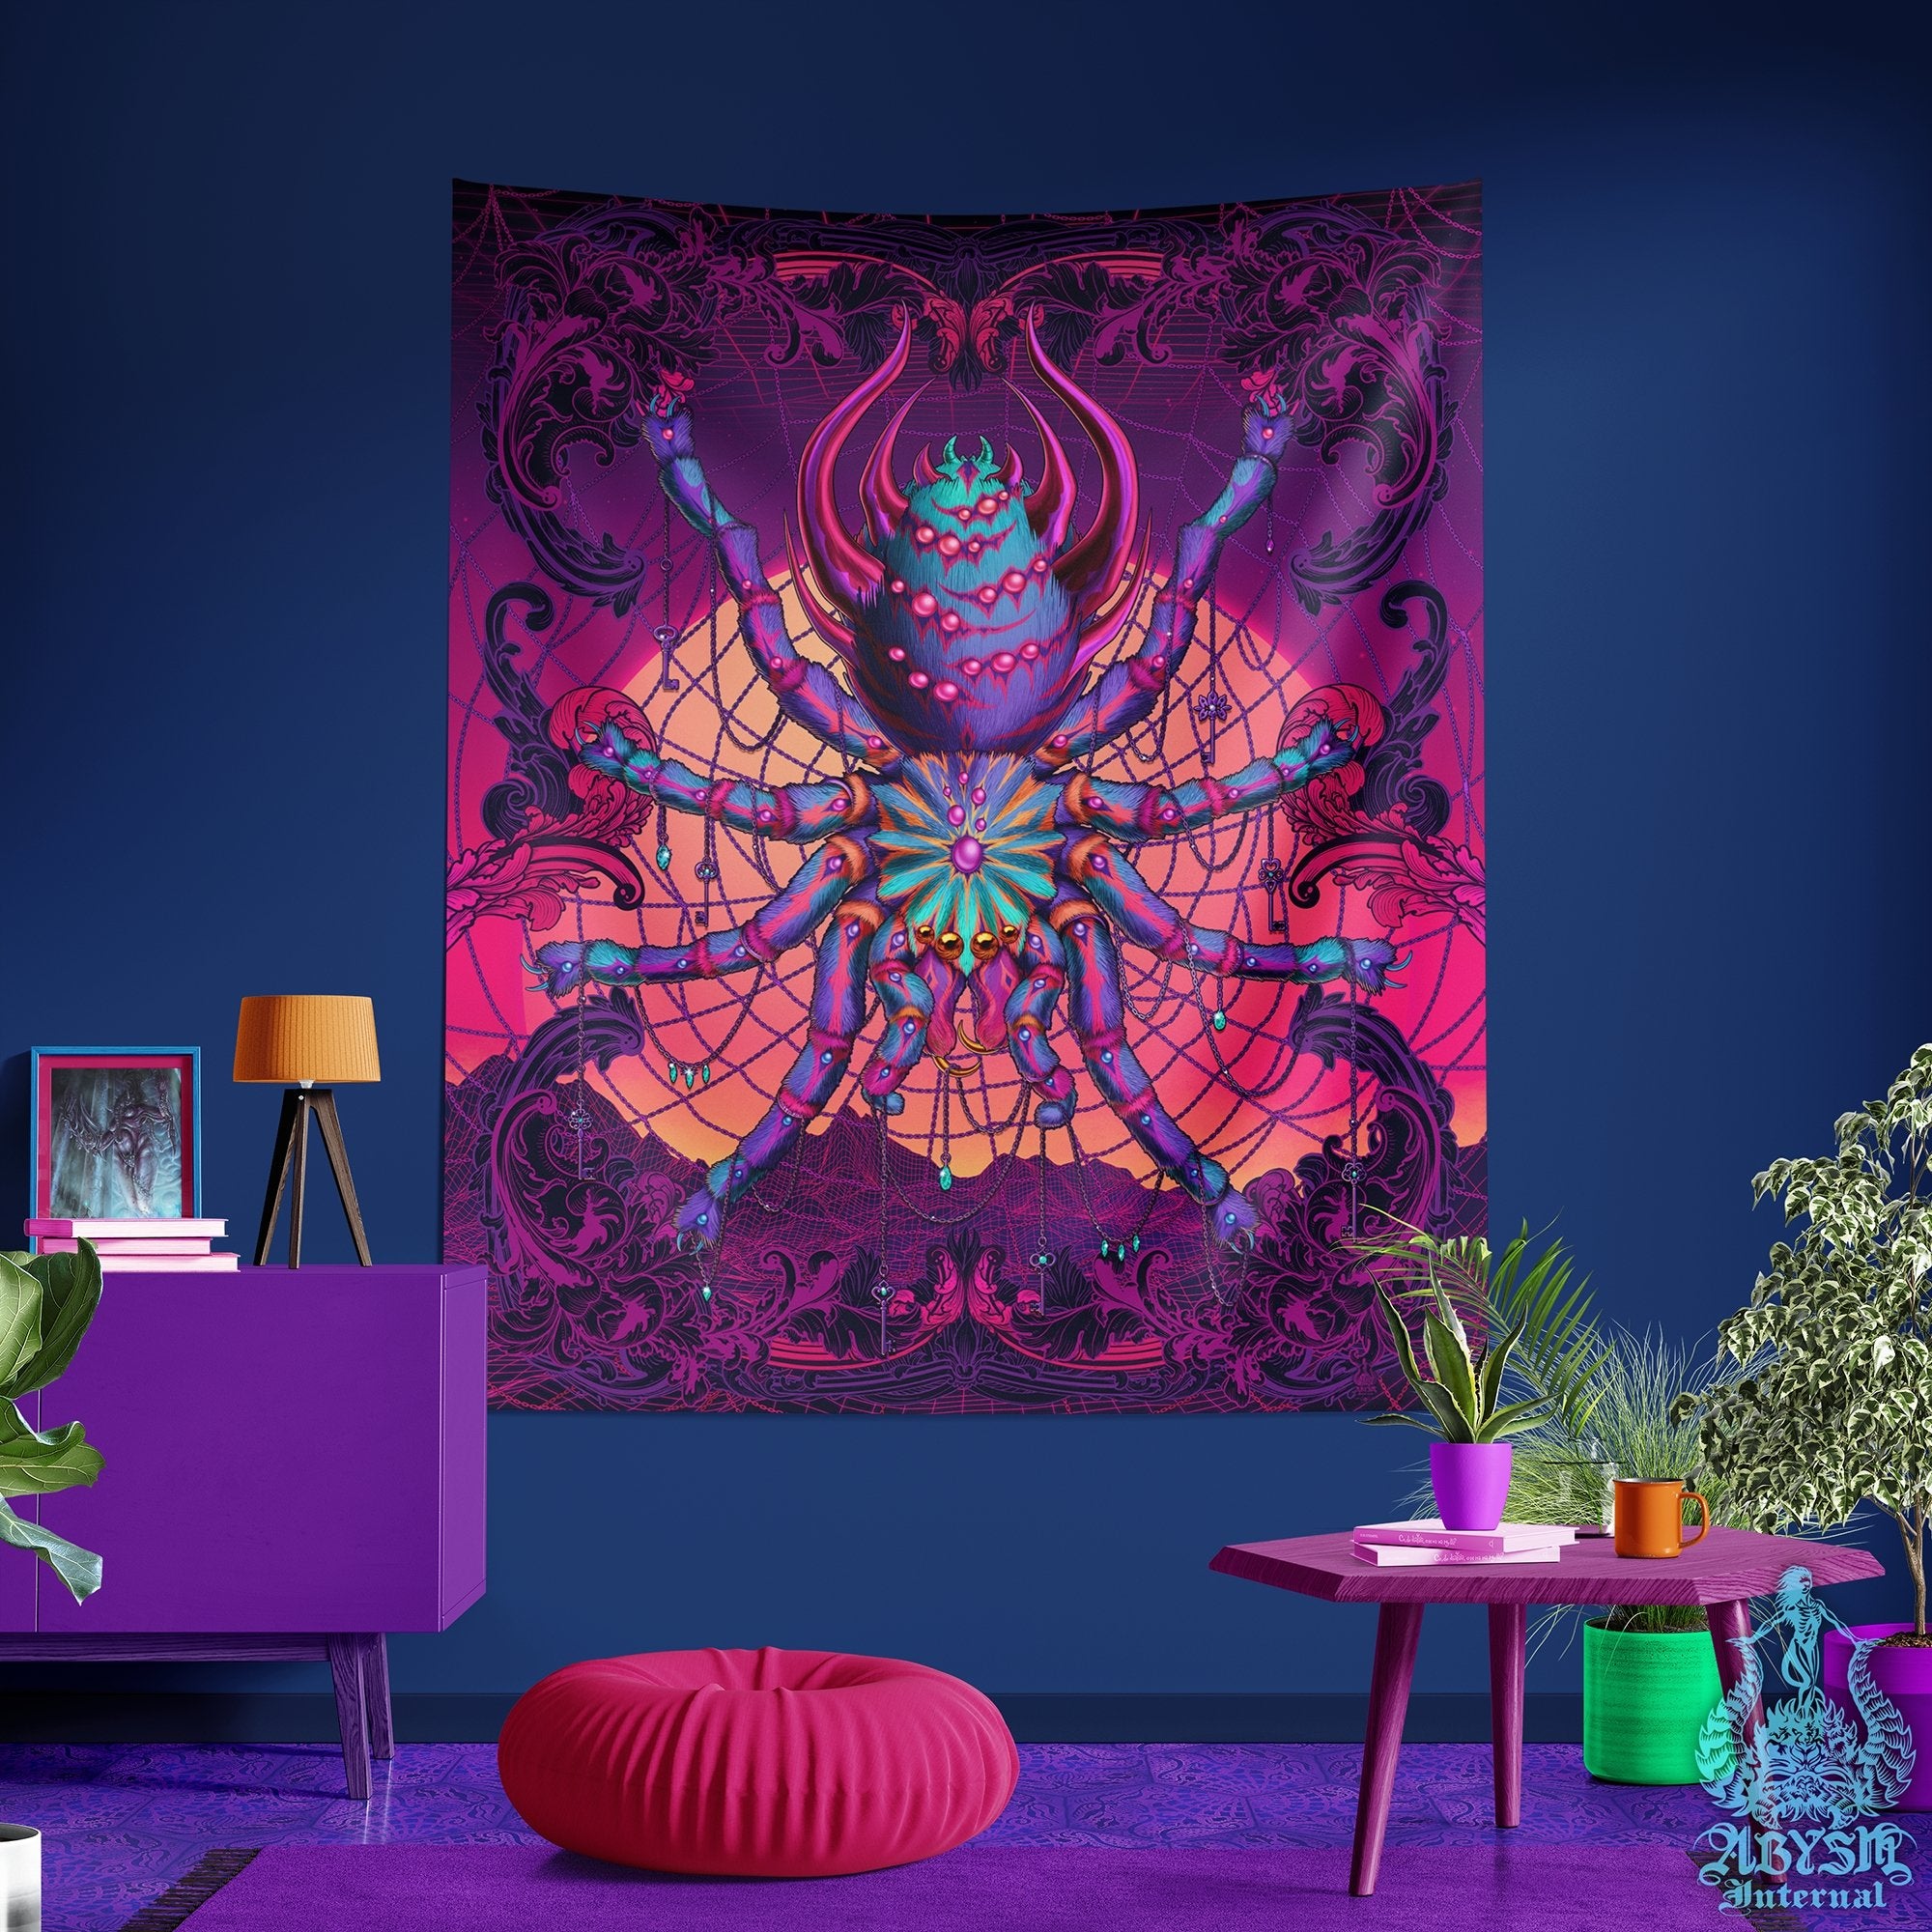 Psychedelic Tapestry, Vaporwave Wall Hanging, Retrowave 80s Home Decor, Synthwave Art Print, Eclectic and Funky - Spider, Tarantula - Abysm Internal